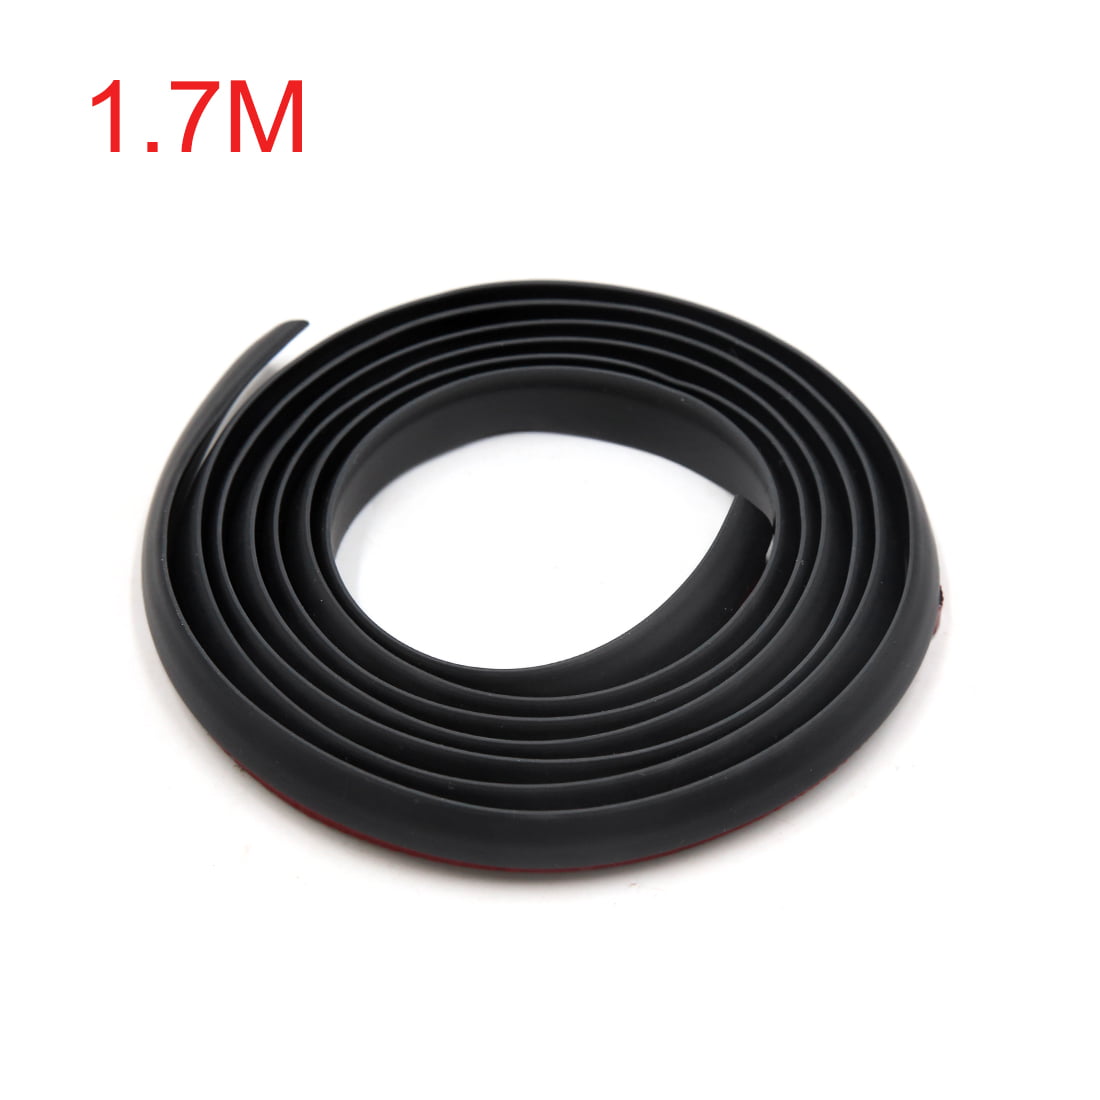 Small Vertical Fin rubber car edge protective trim seal 35mm x 10mm